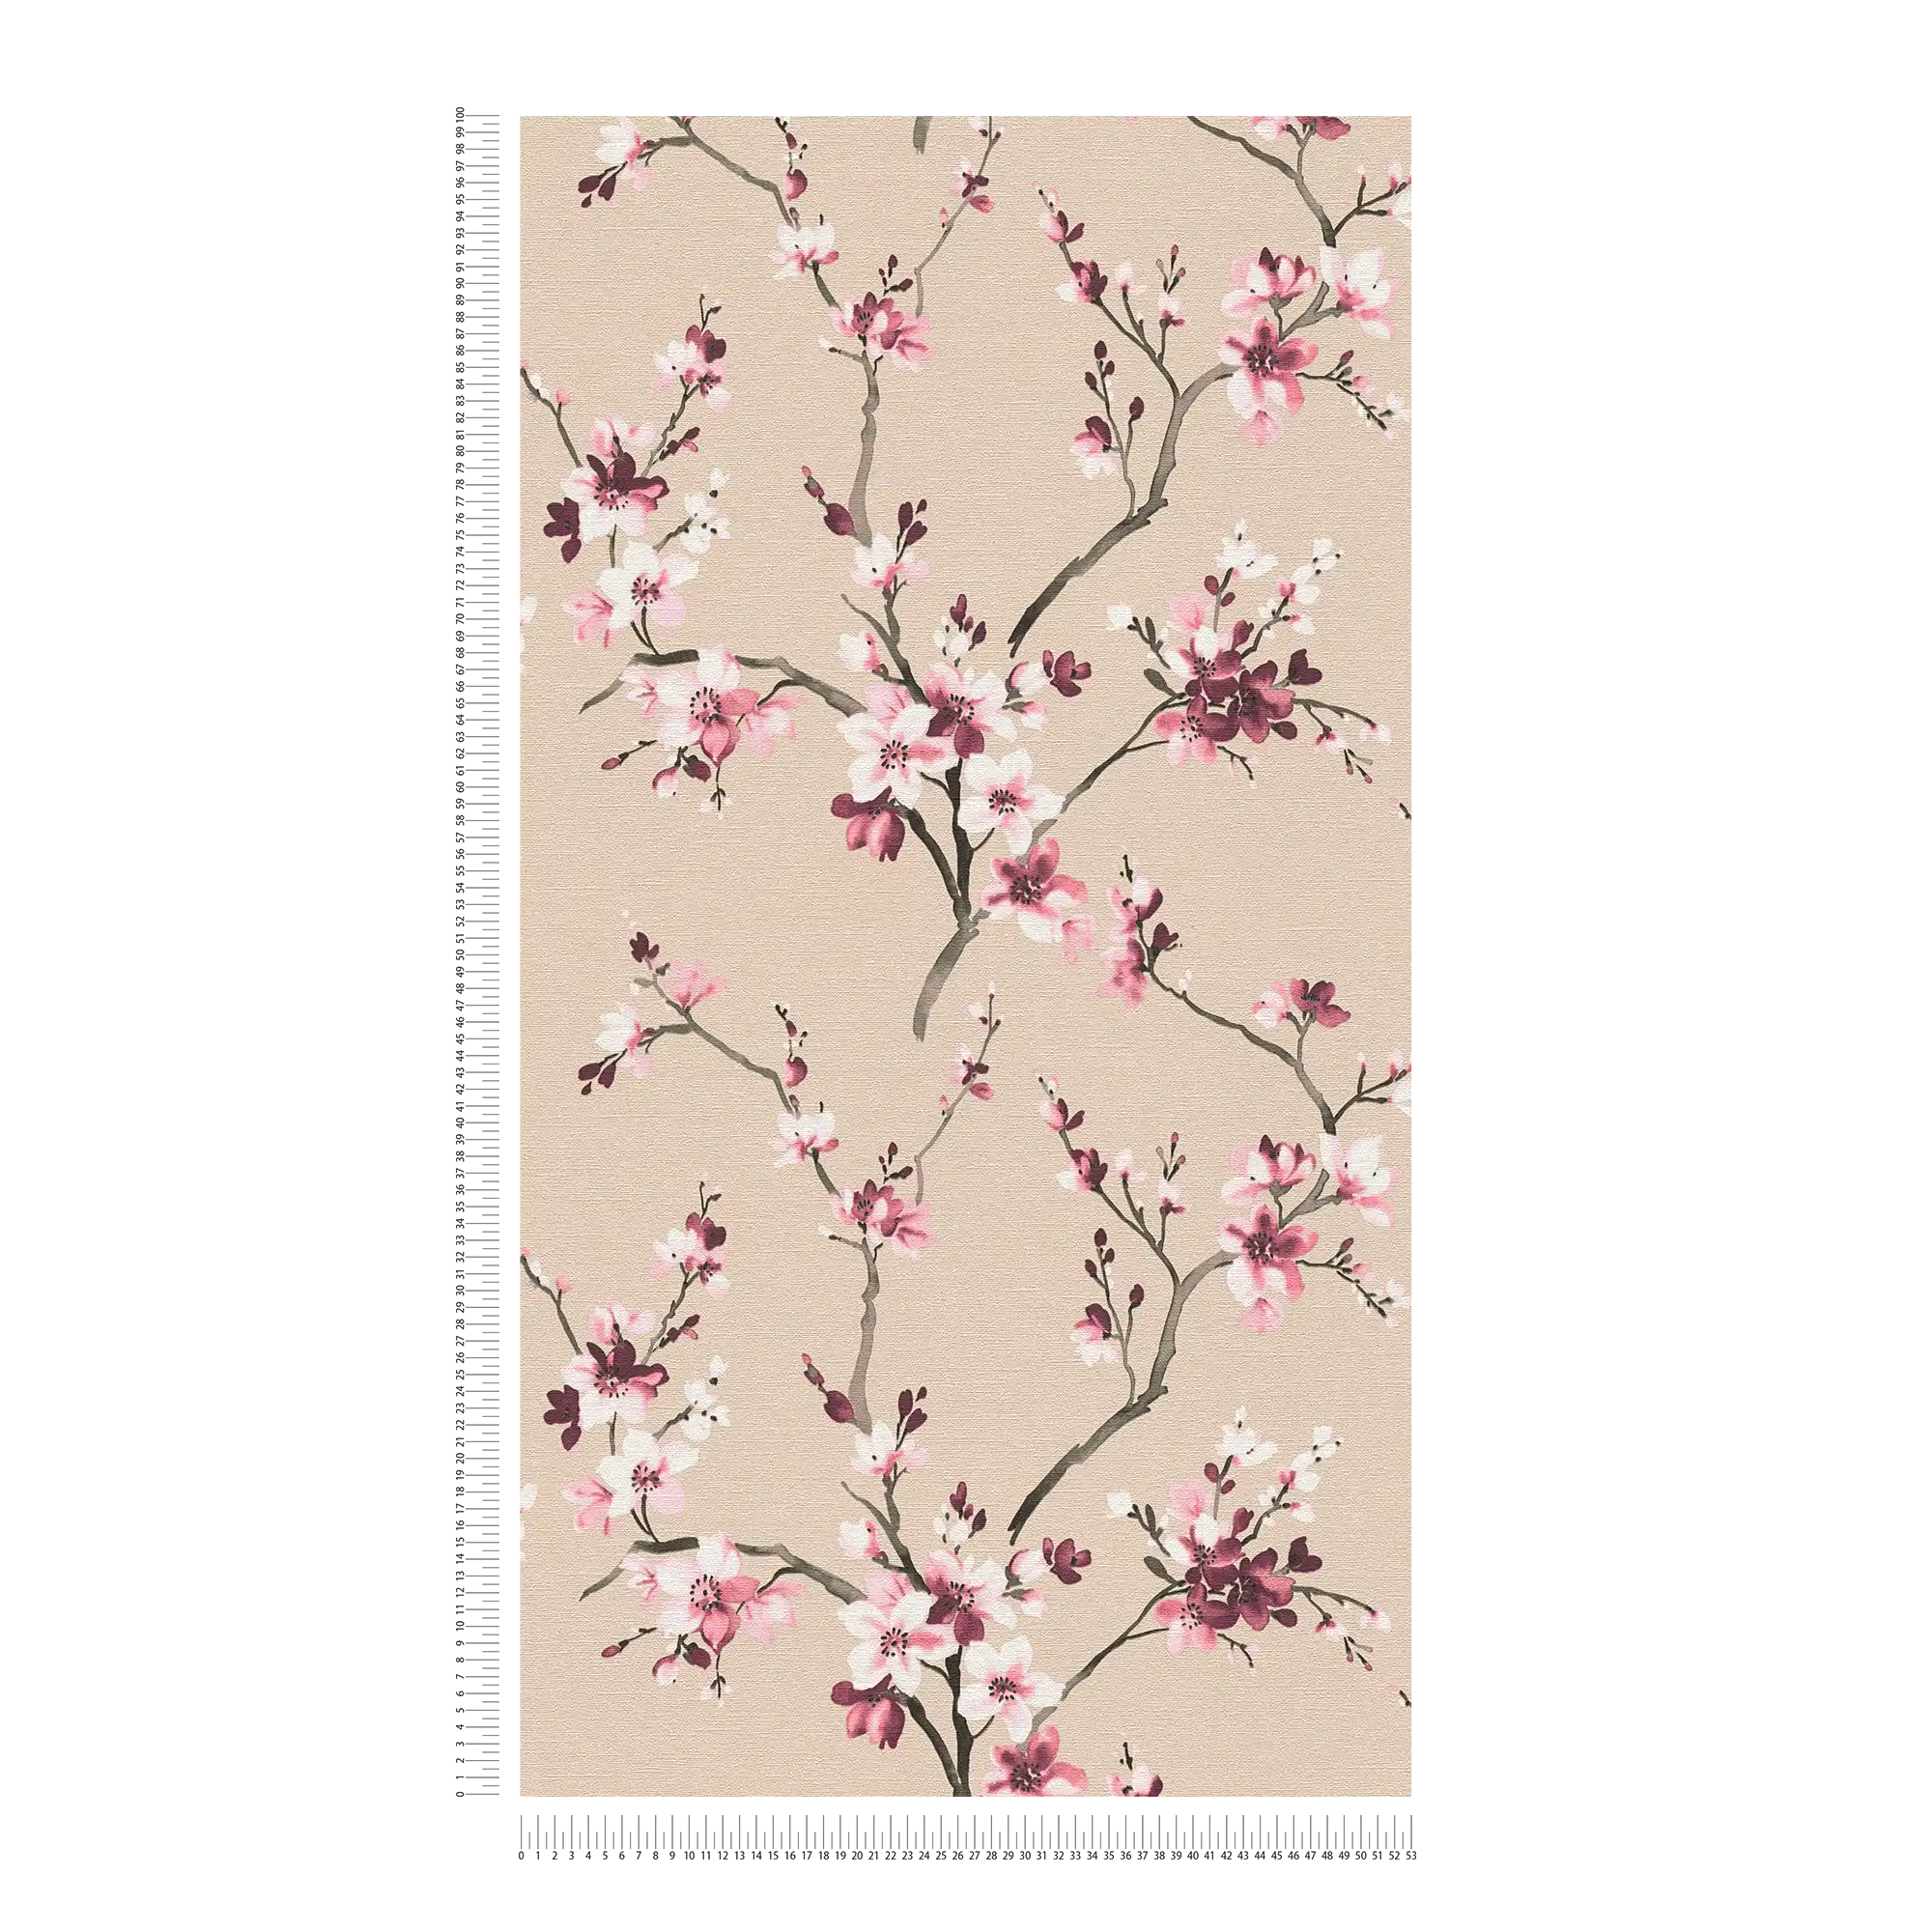             Pink floral wallpaper with watercolour flowers & branches
        